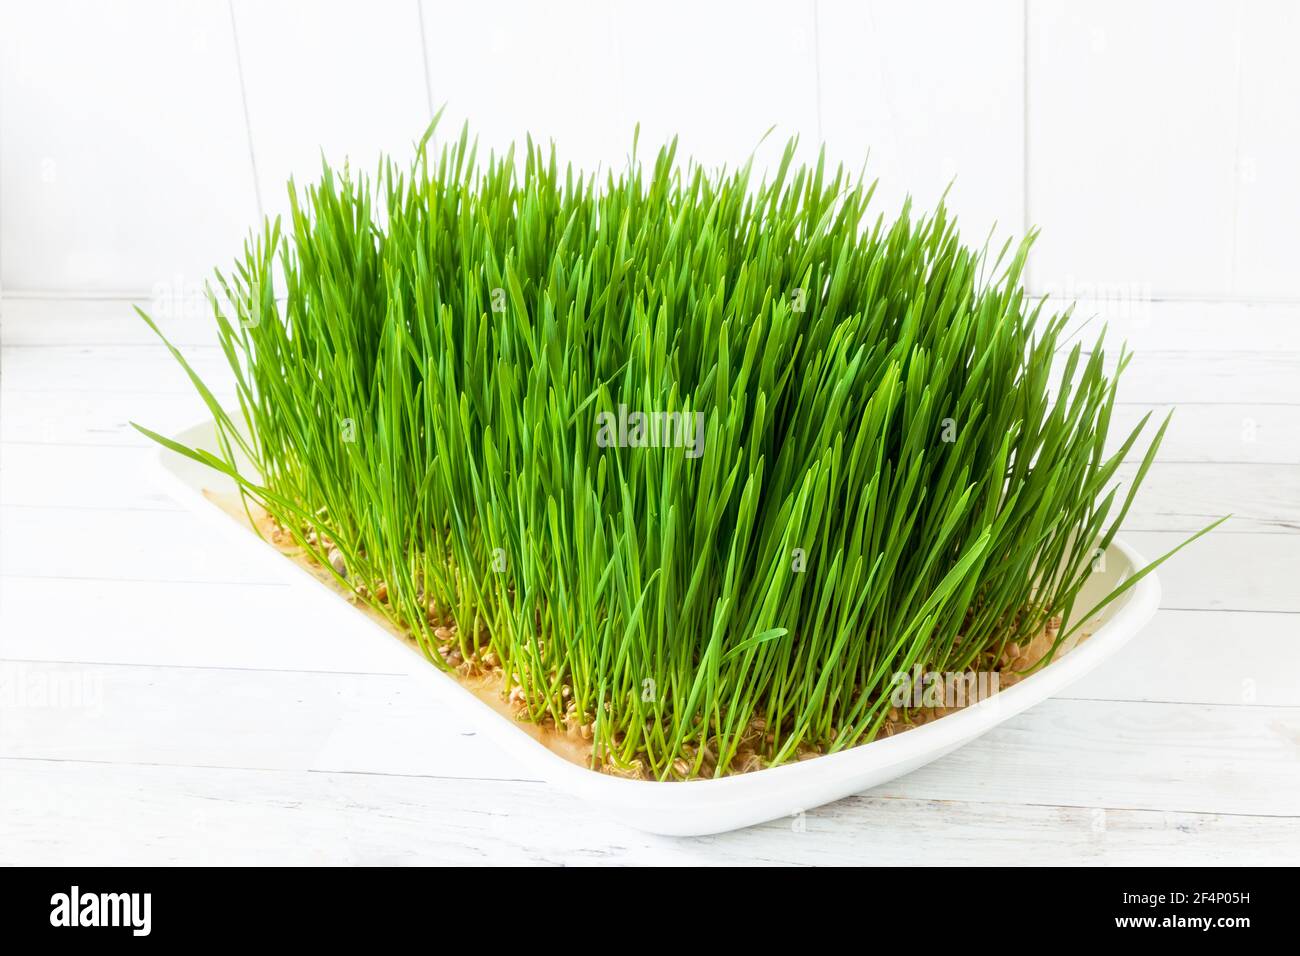 A flat full of home grown wheatgrass. Stock Photo